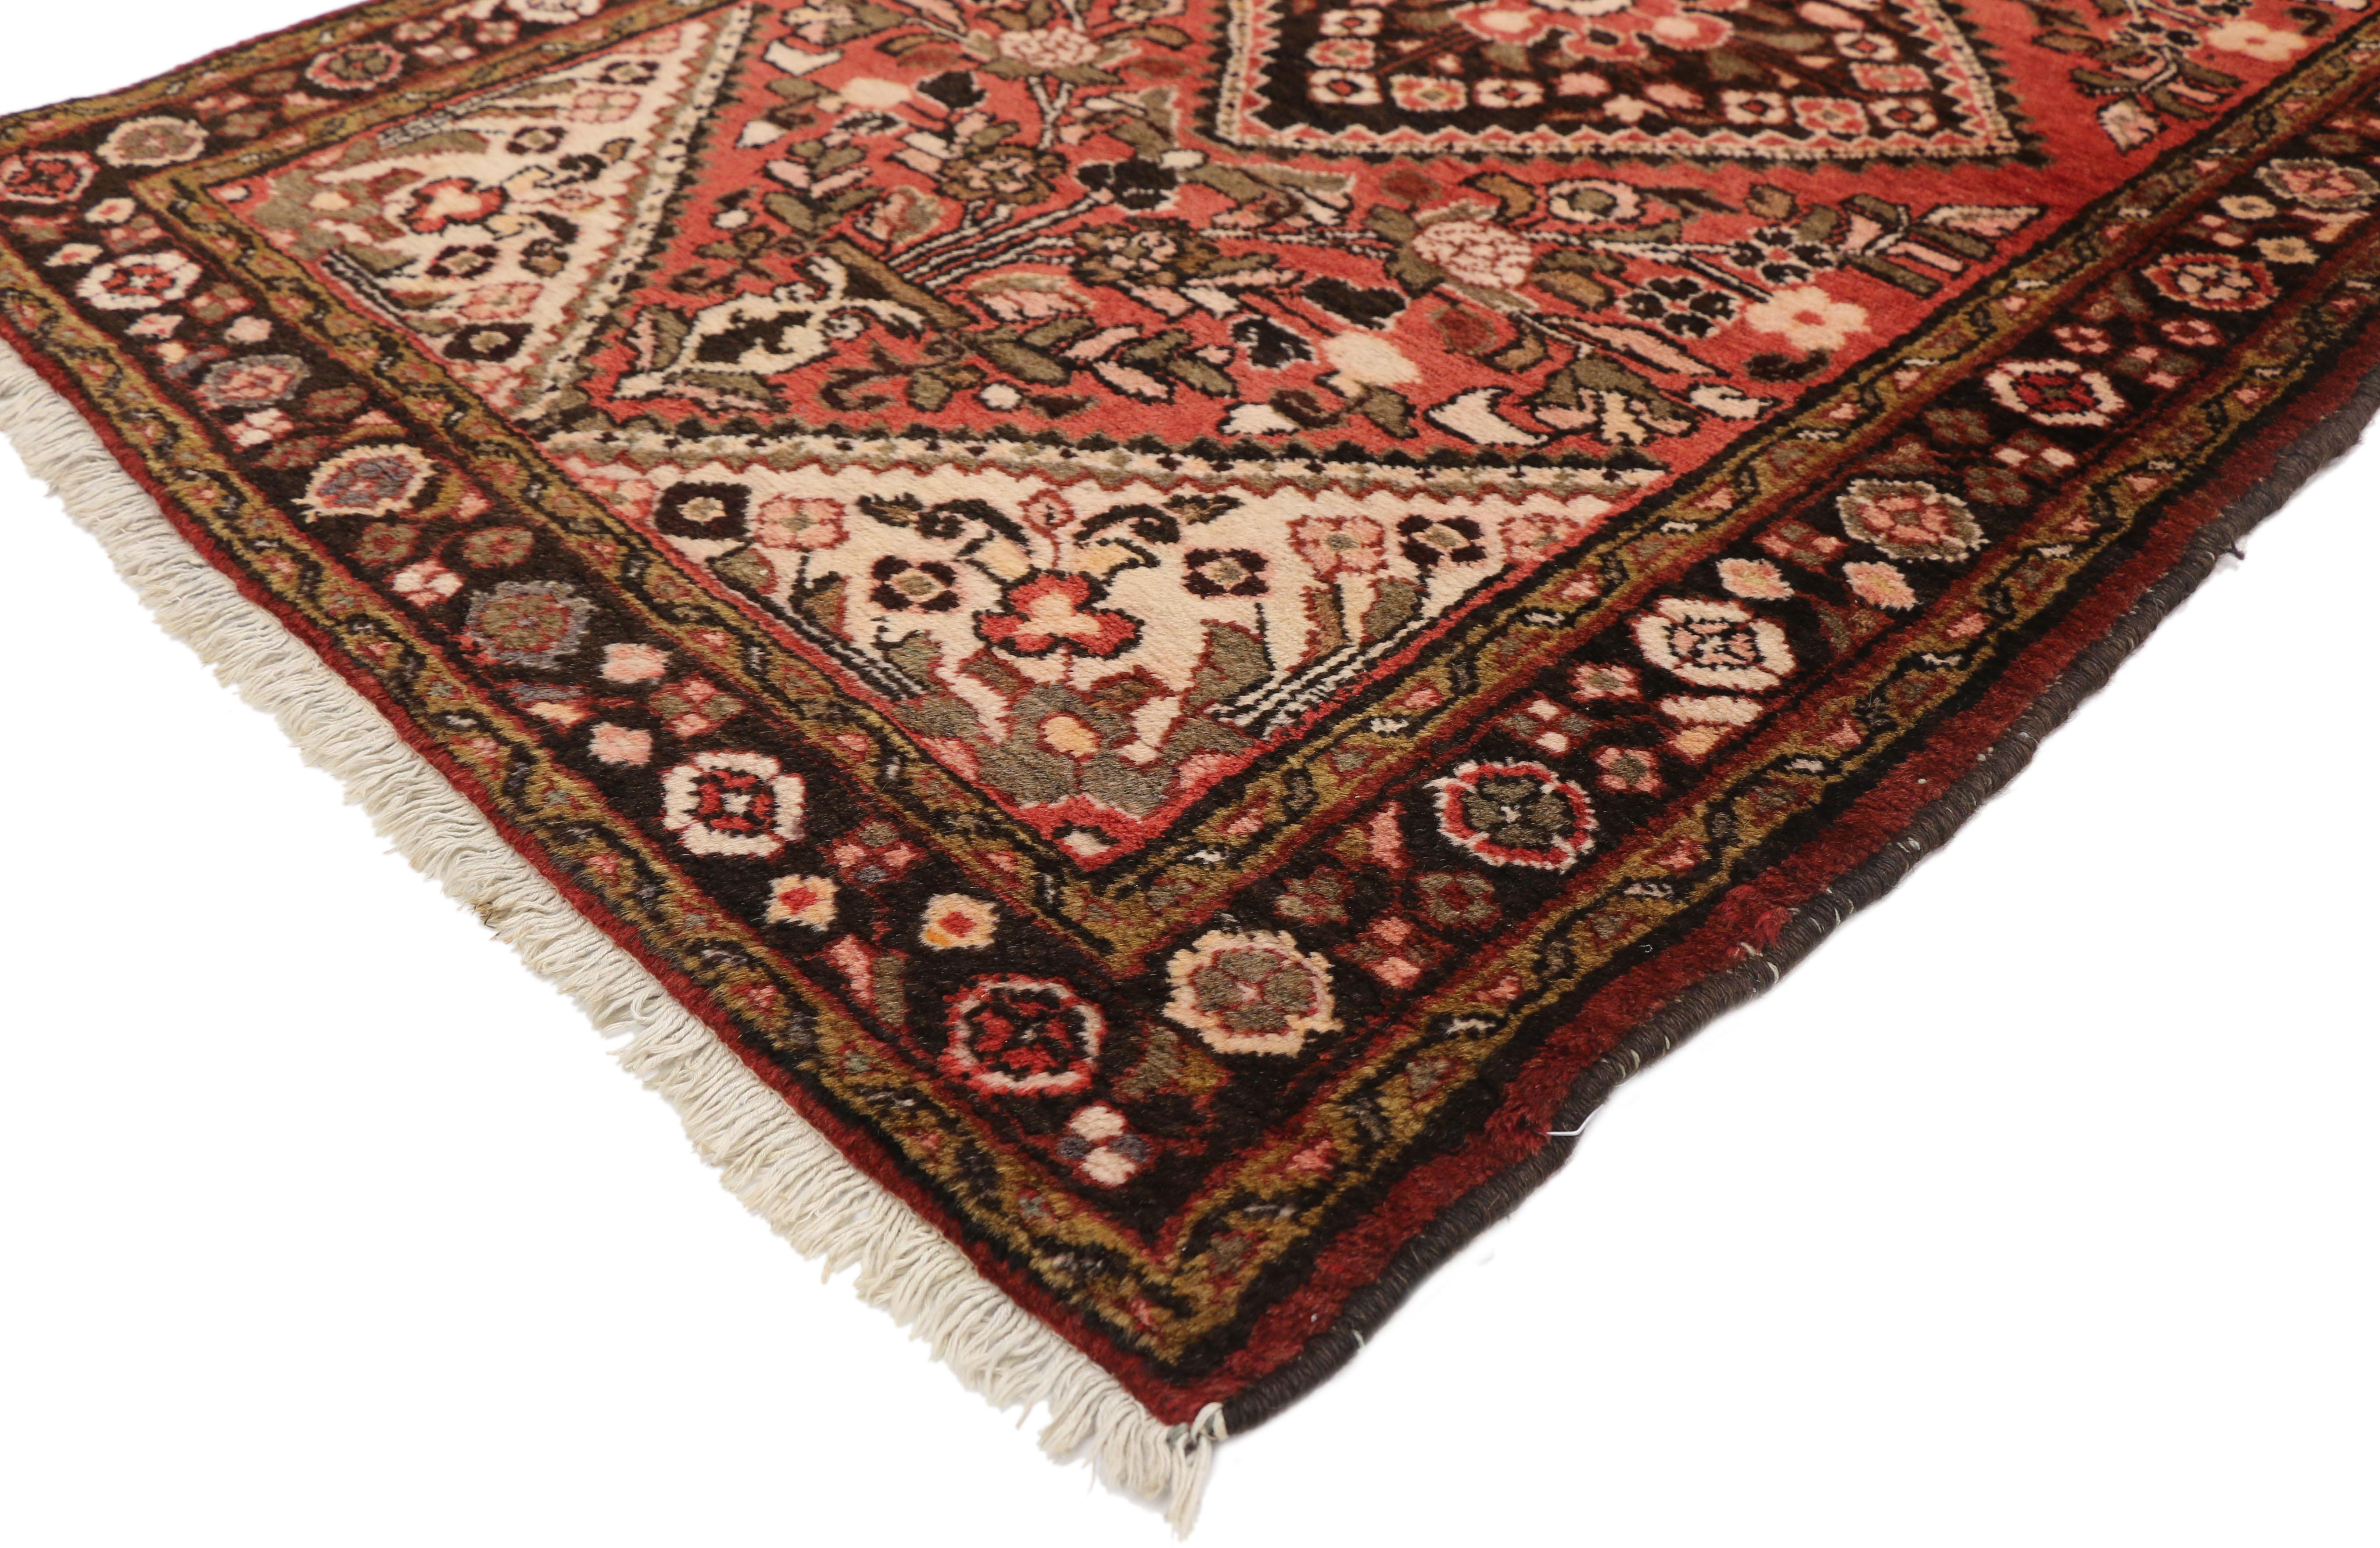 71901 vintage Persian Hamadan Accent rug with Traditional style. This hand knotted wool vintage Persian Hamadan accent rug features an onyx central medallion with zigzag edges in an abrashed red field. A Persian vase blooming with stylized flowers